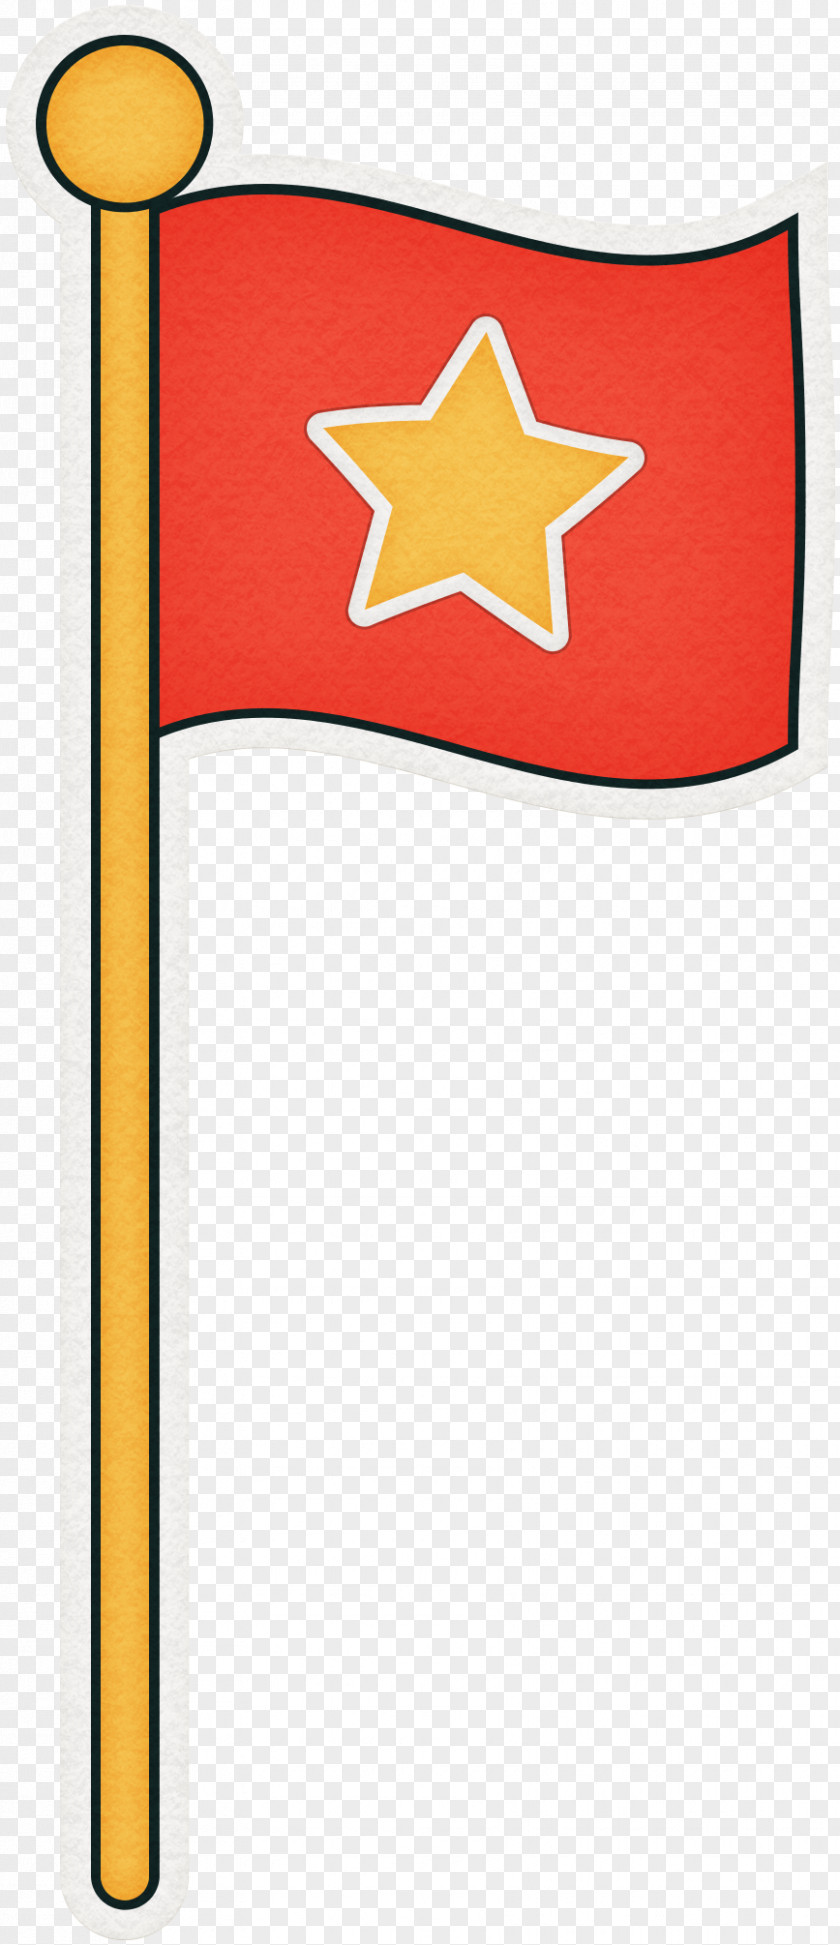 Cartoon Red Five-pointed Star Flag Download PNG